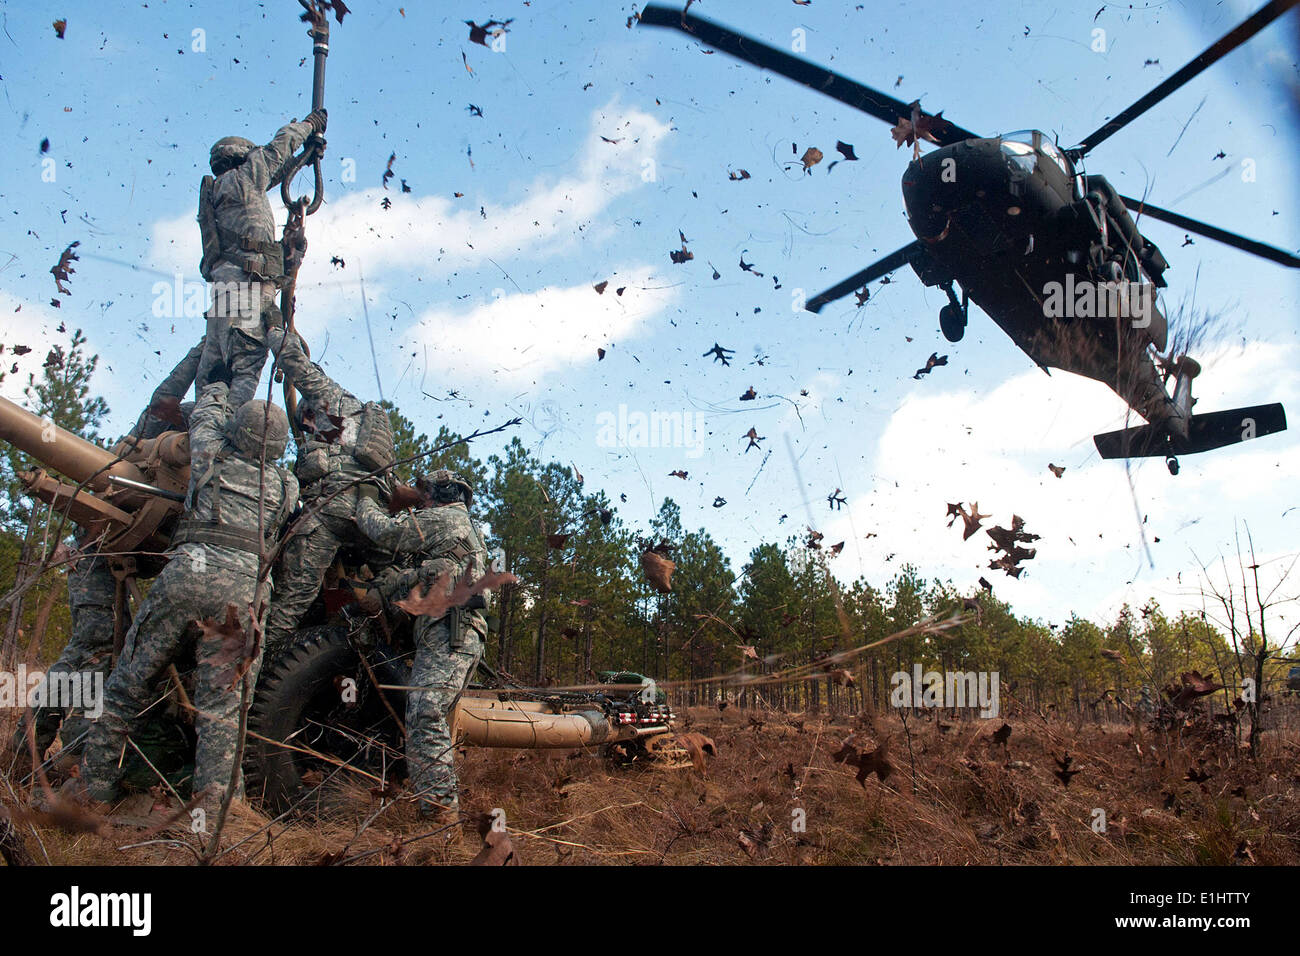 Leaves and twigs are whipped into the air by the rotor wash of UH-60 Black Hawk helicopter as soldiers prepare to hook up an M1 Stock Photo